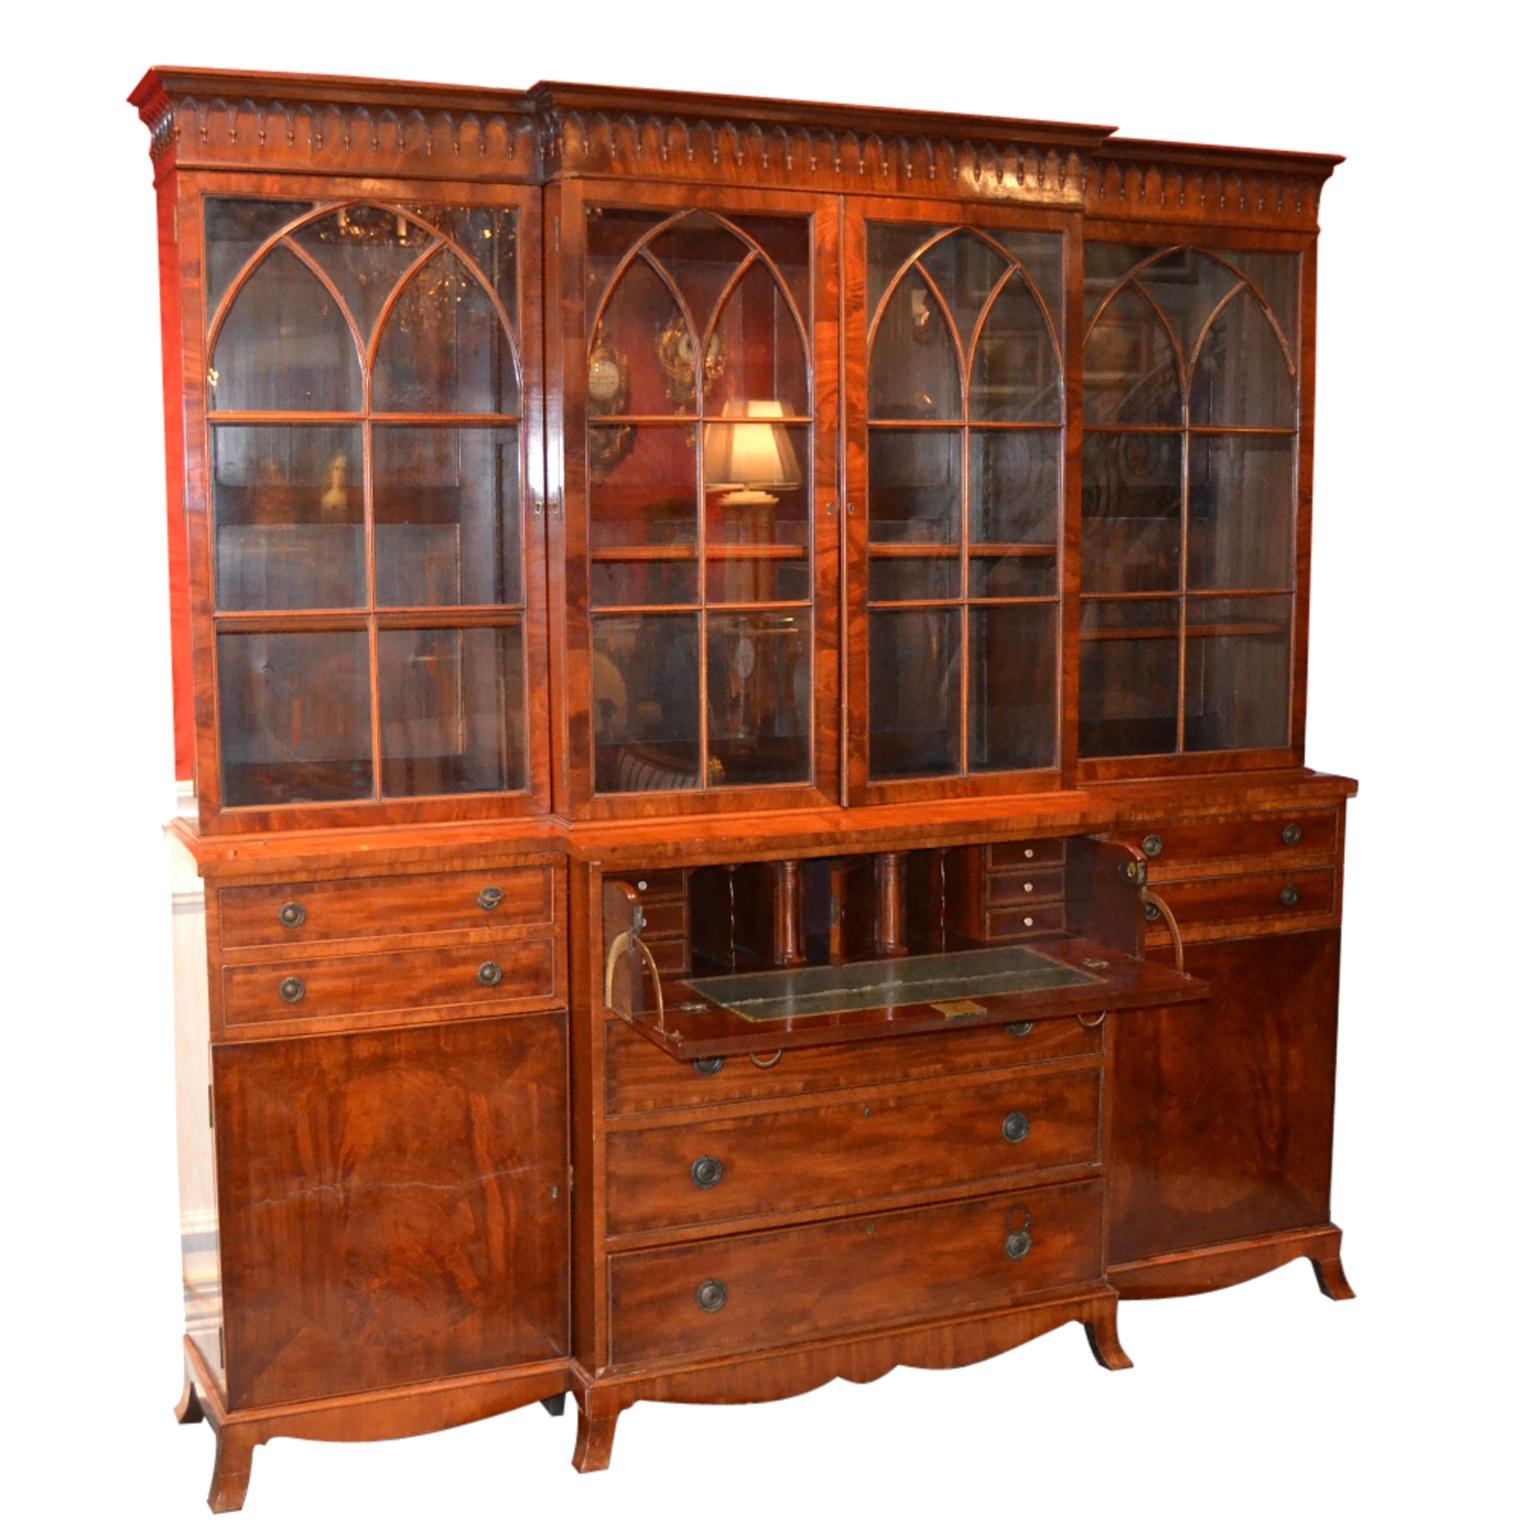 A late George IV breakfront bookcase/china cabinet and pull out desk in beautifully figured mahogany with some Gothic tracery elements along the top. The cabinet is in three sections, the outside two having two top locked drawers, (accessed from